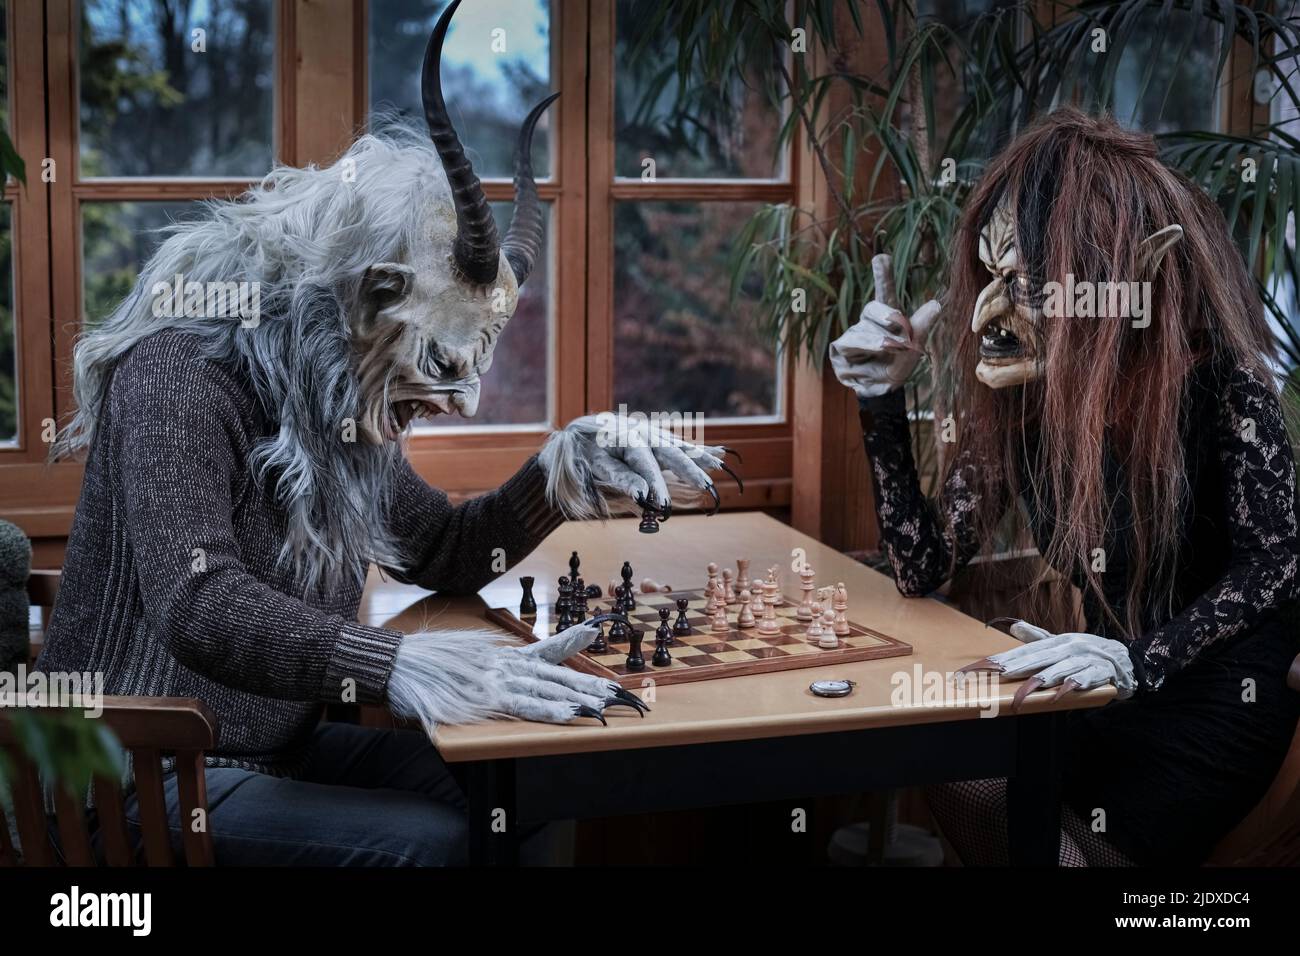 Mature man and woman in ghost costume playing chess game sitting at table Stock Photo